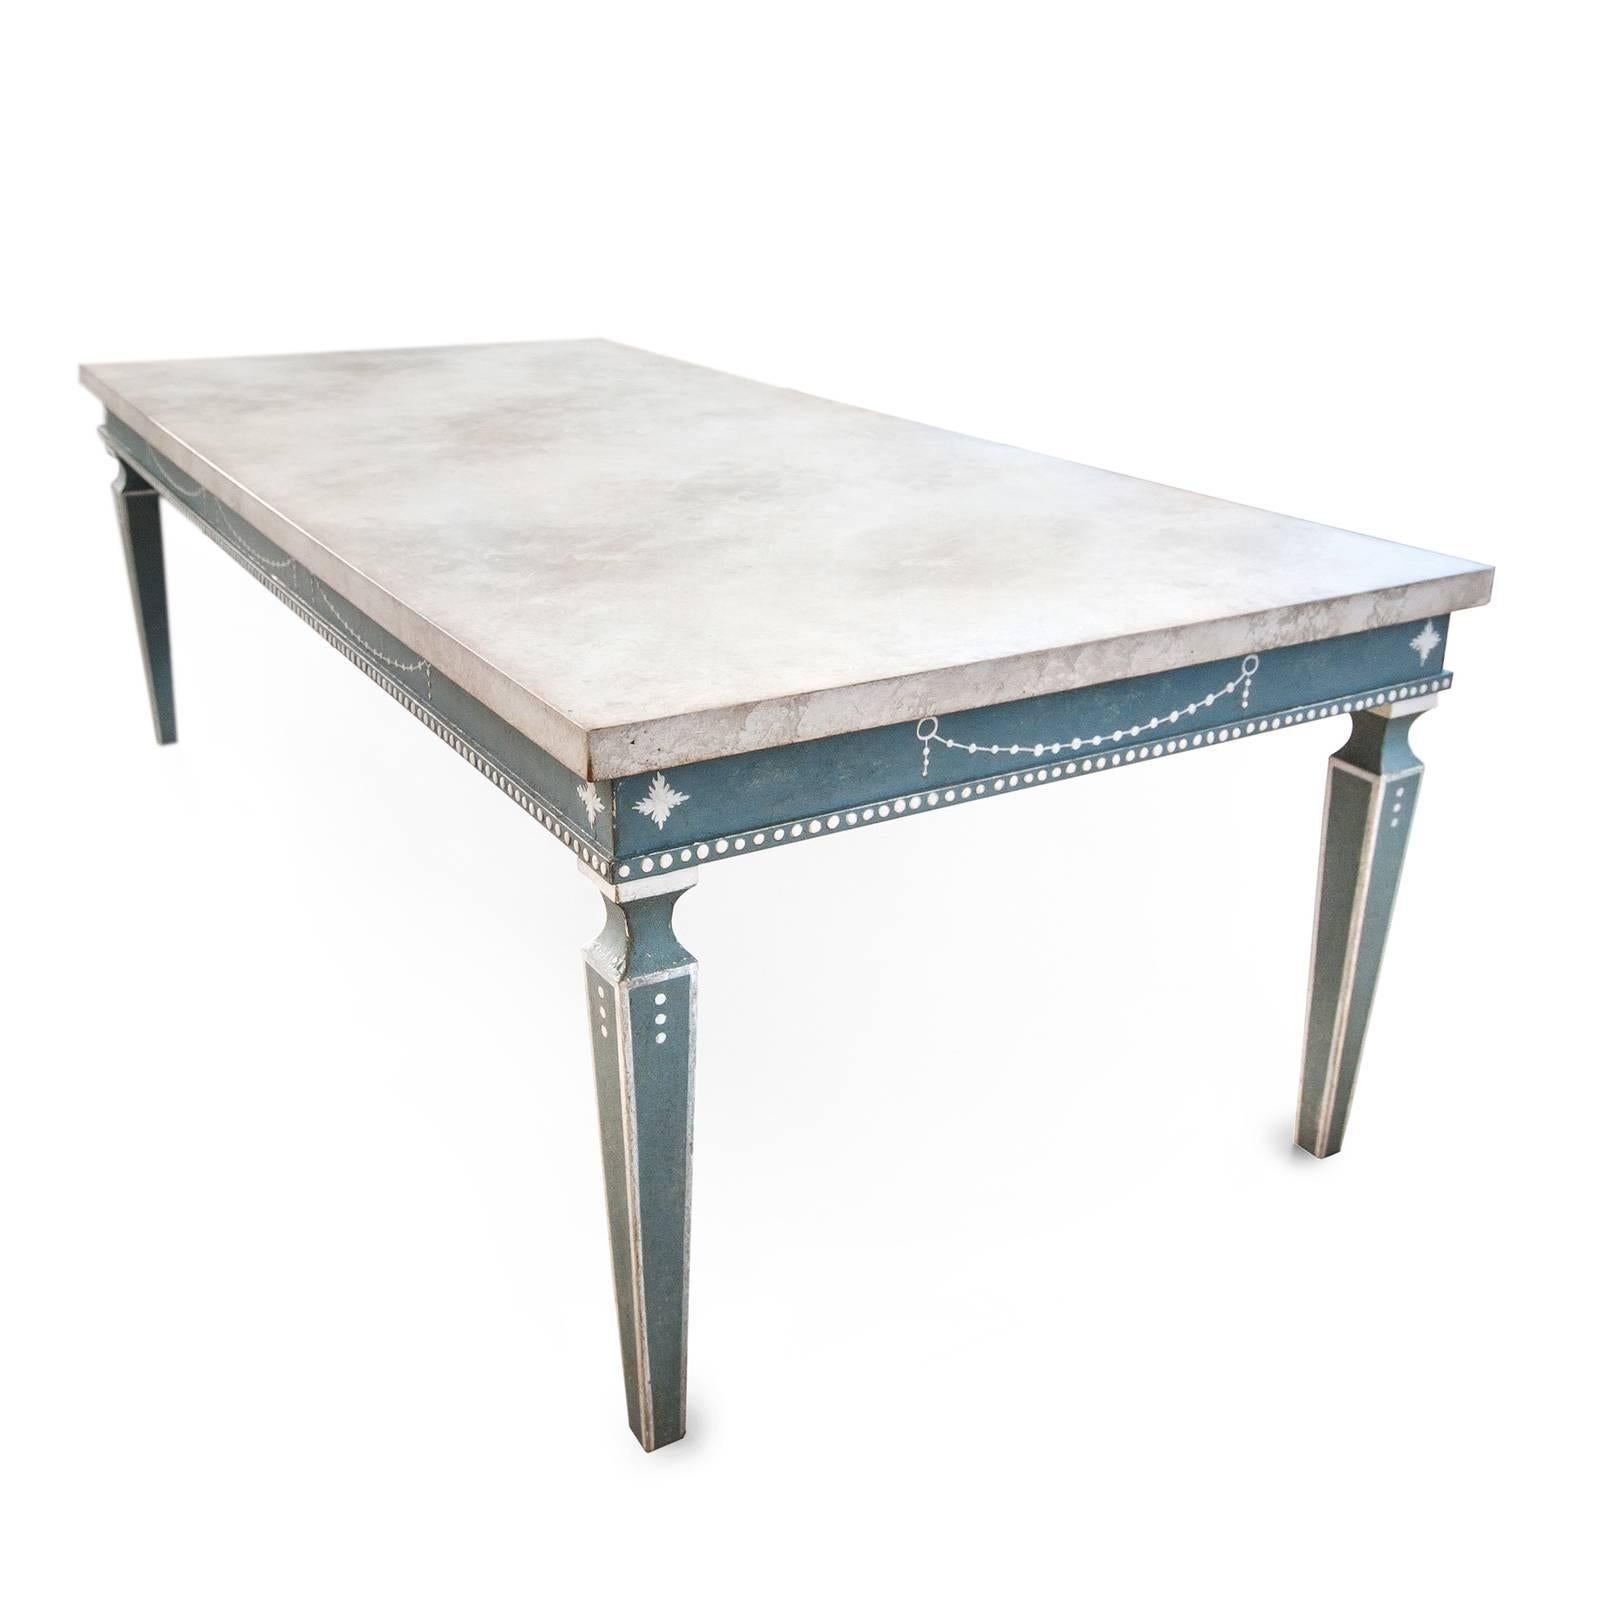 An exquisite example of 18th century Venetian style, this stately table will infuse refinement into any decor. Entirely crafted and painted by hand using Venice-inspired colors and motifs, this table displays a rectangular silhouette with tapered